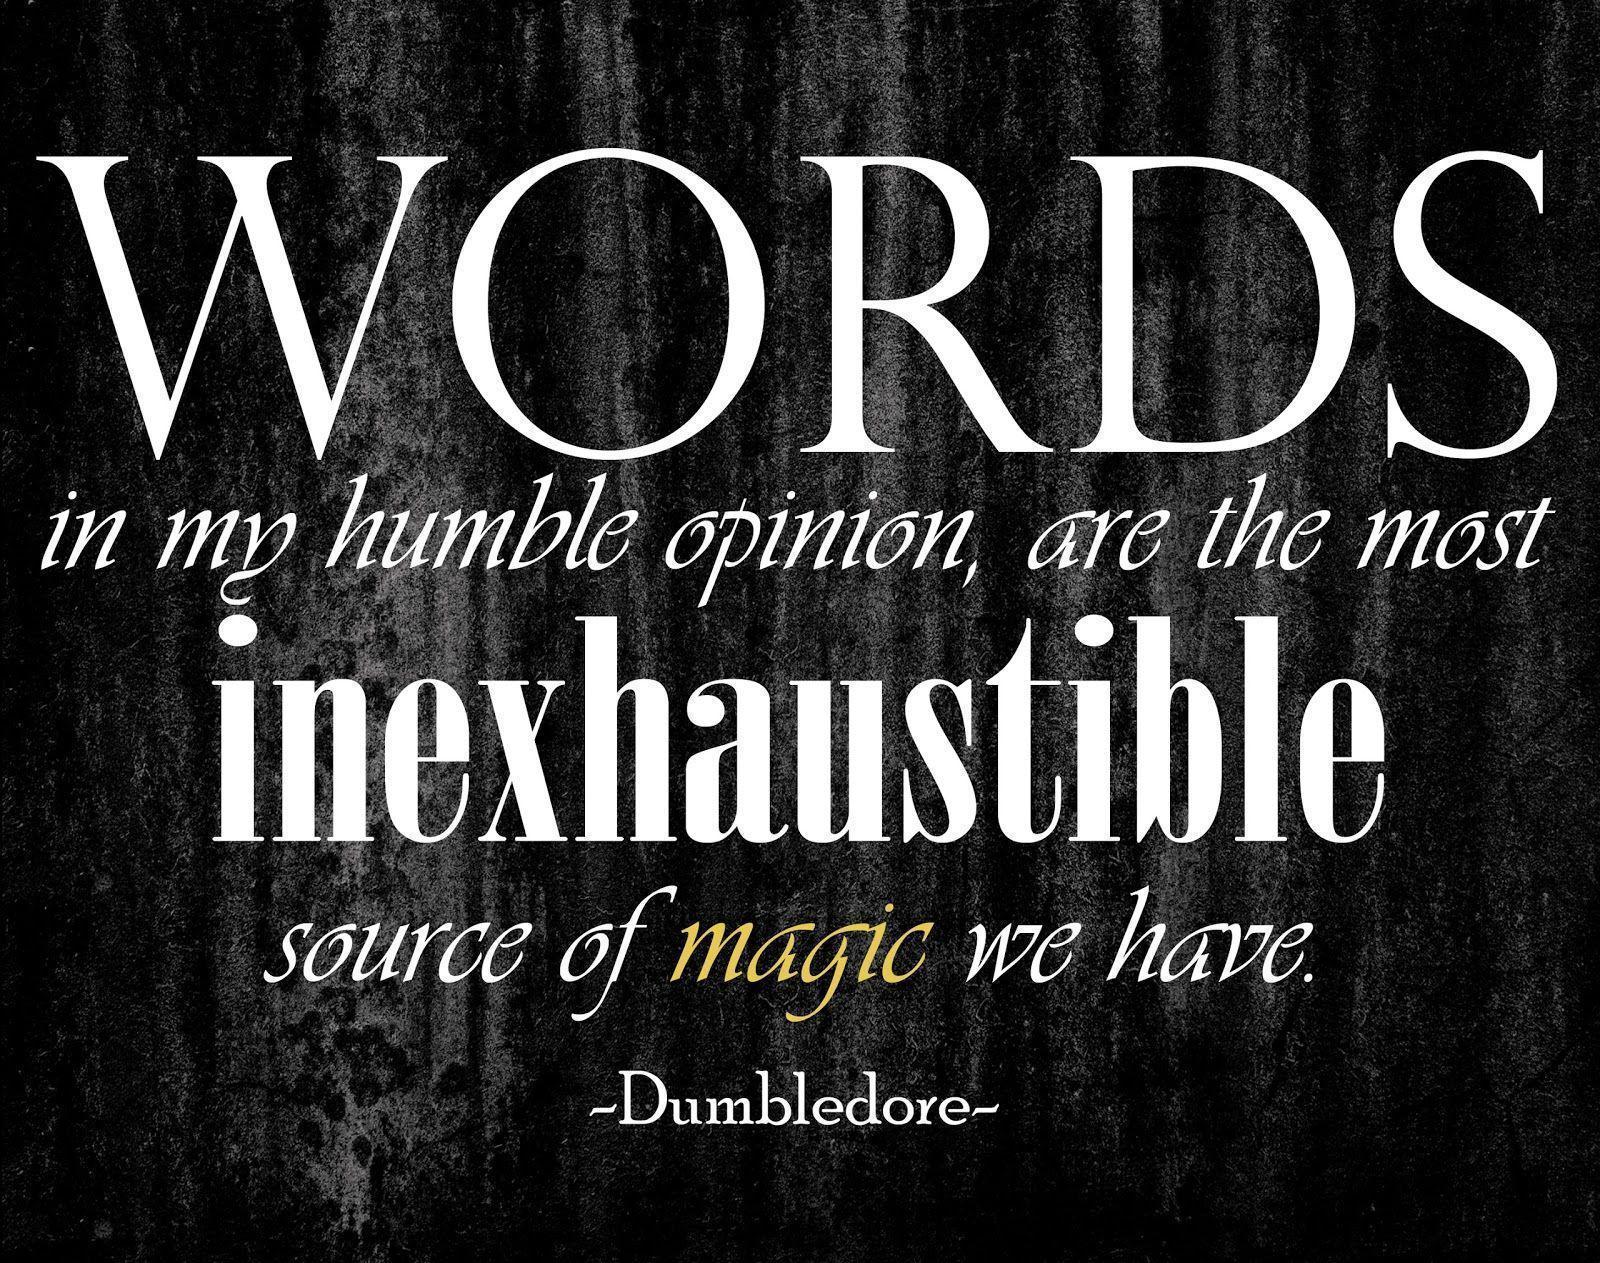 Harry Potter Quotes Wallpaper Background, Quotes Wallpaper